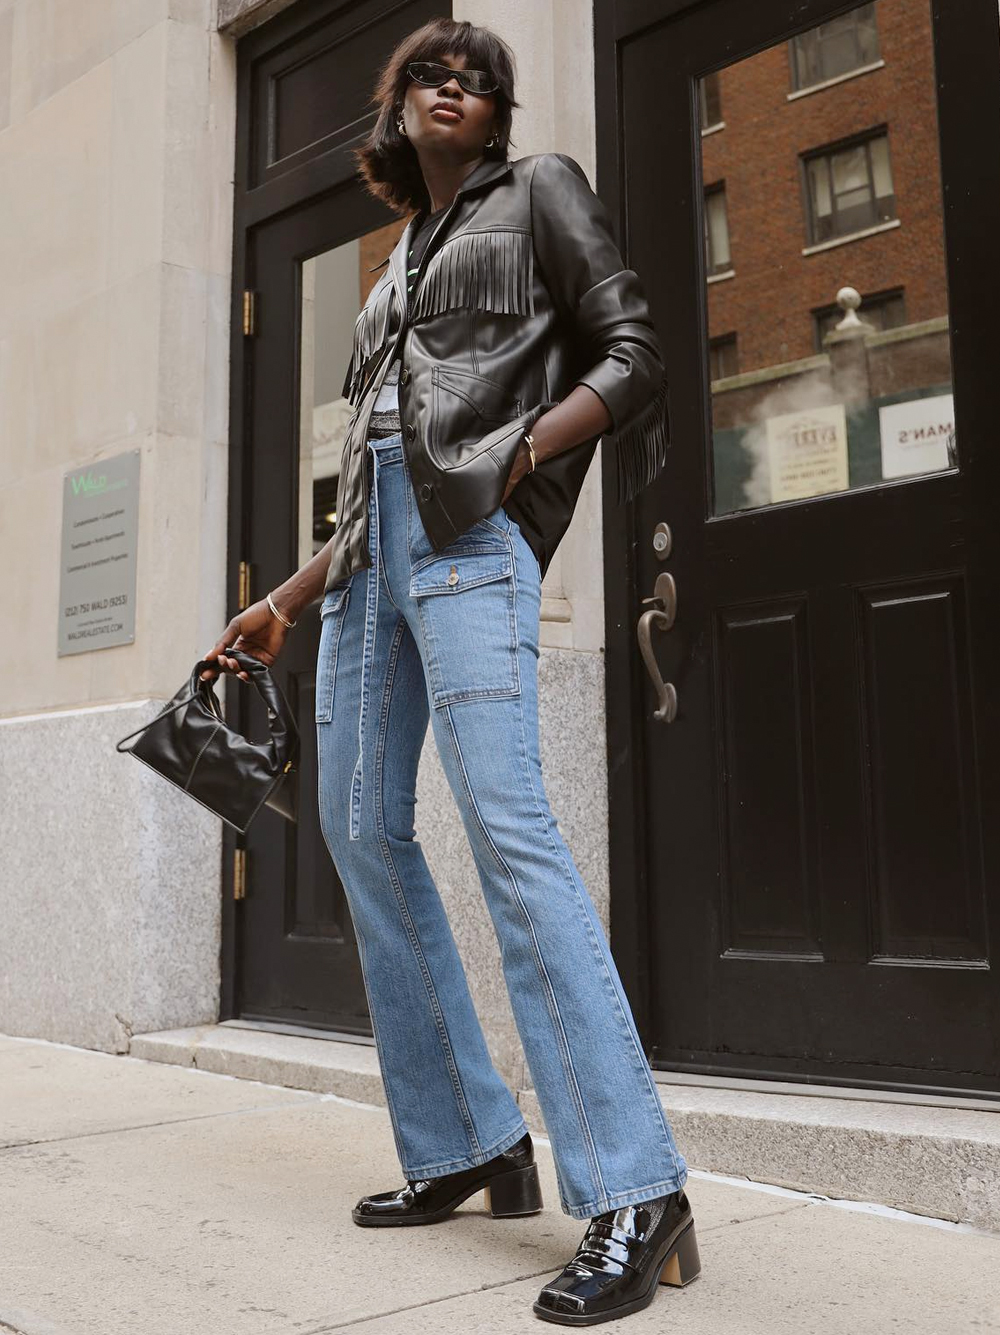 5 Leather Jacket Styles That Are Timeless | Who What Wear